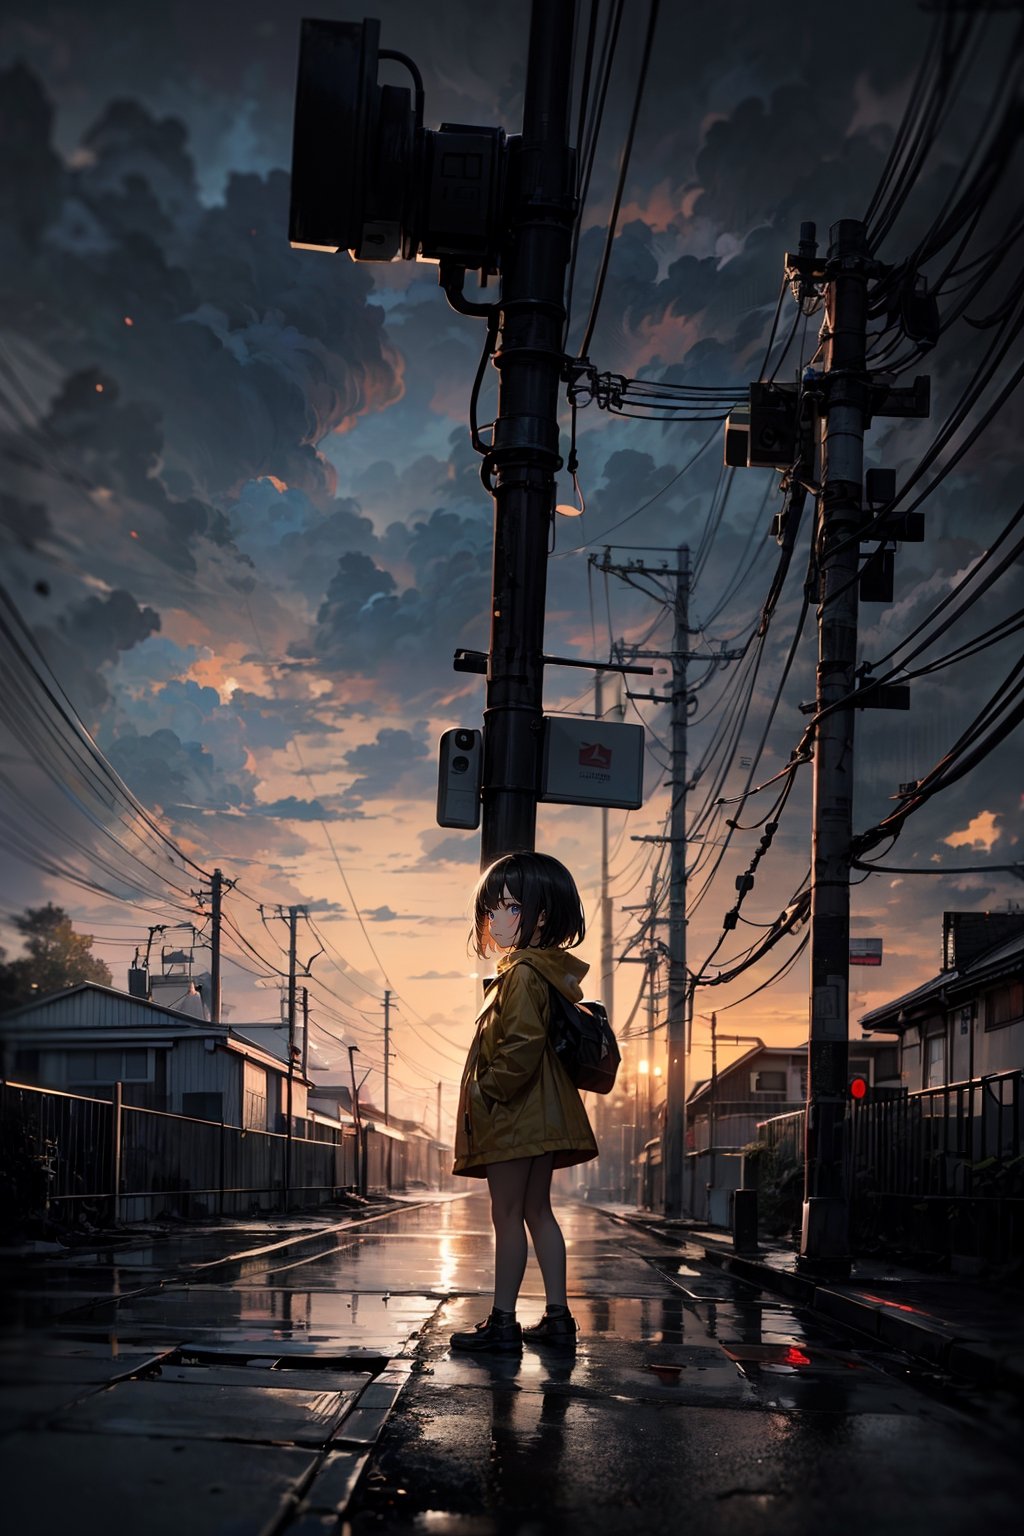 A dramatic black and white photograph of a little girl wearing a yellow raincoat, her silhouette stark against the backdrop of a stormy sky and a solitary telephone pole. The image captures the raw beauty and innocence of childhood amidst the elements.,petite